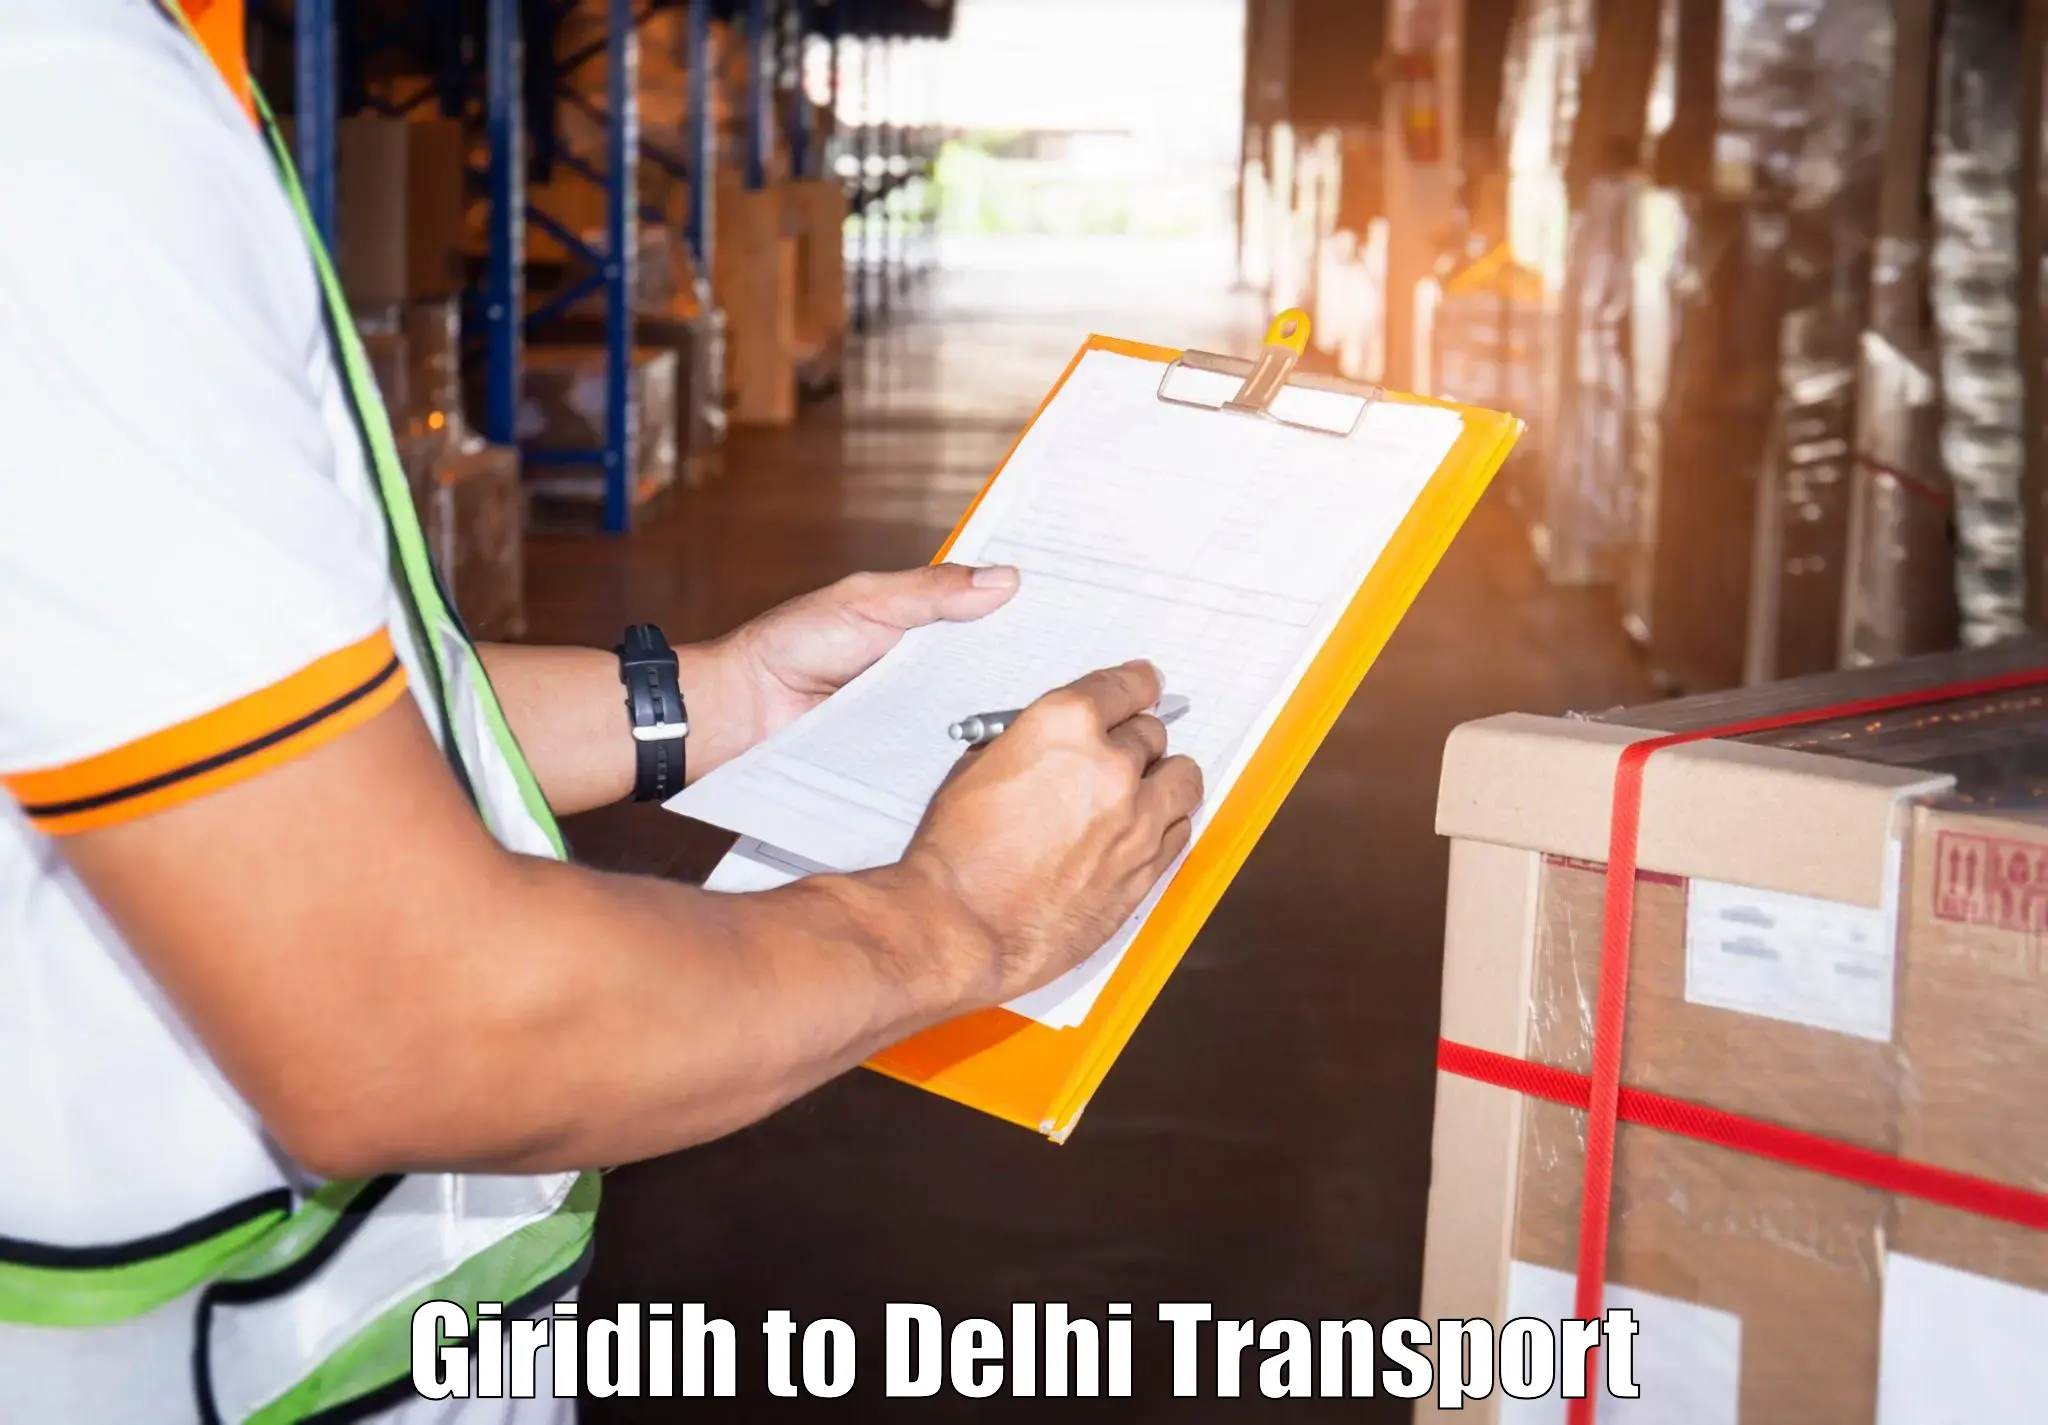 Truck transport companies in India Giridih to NCR